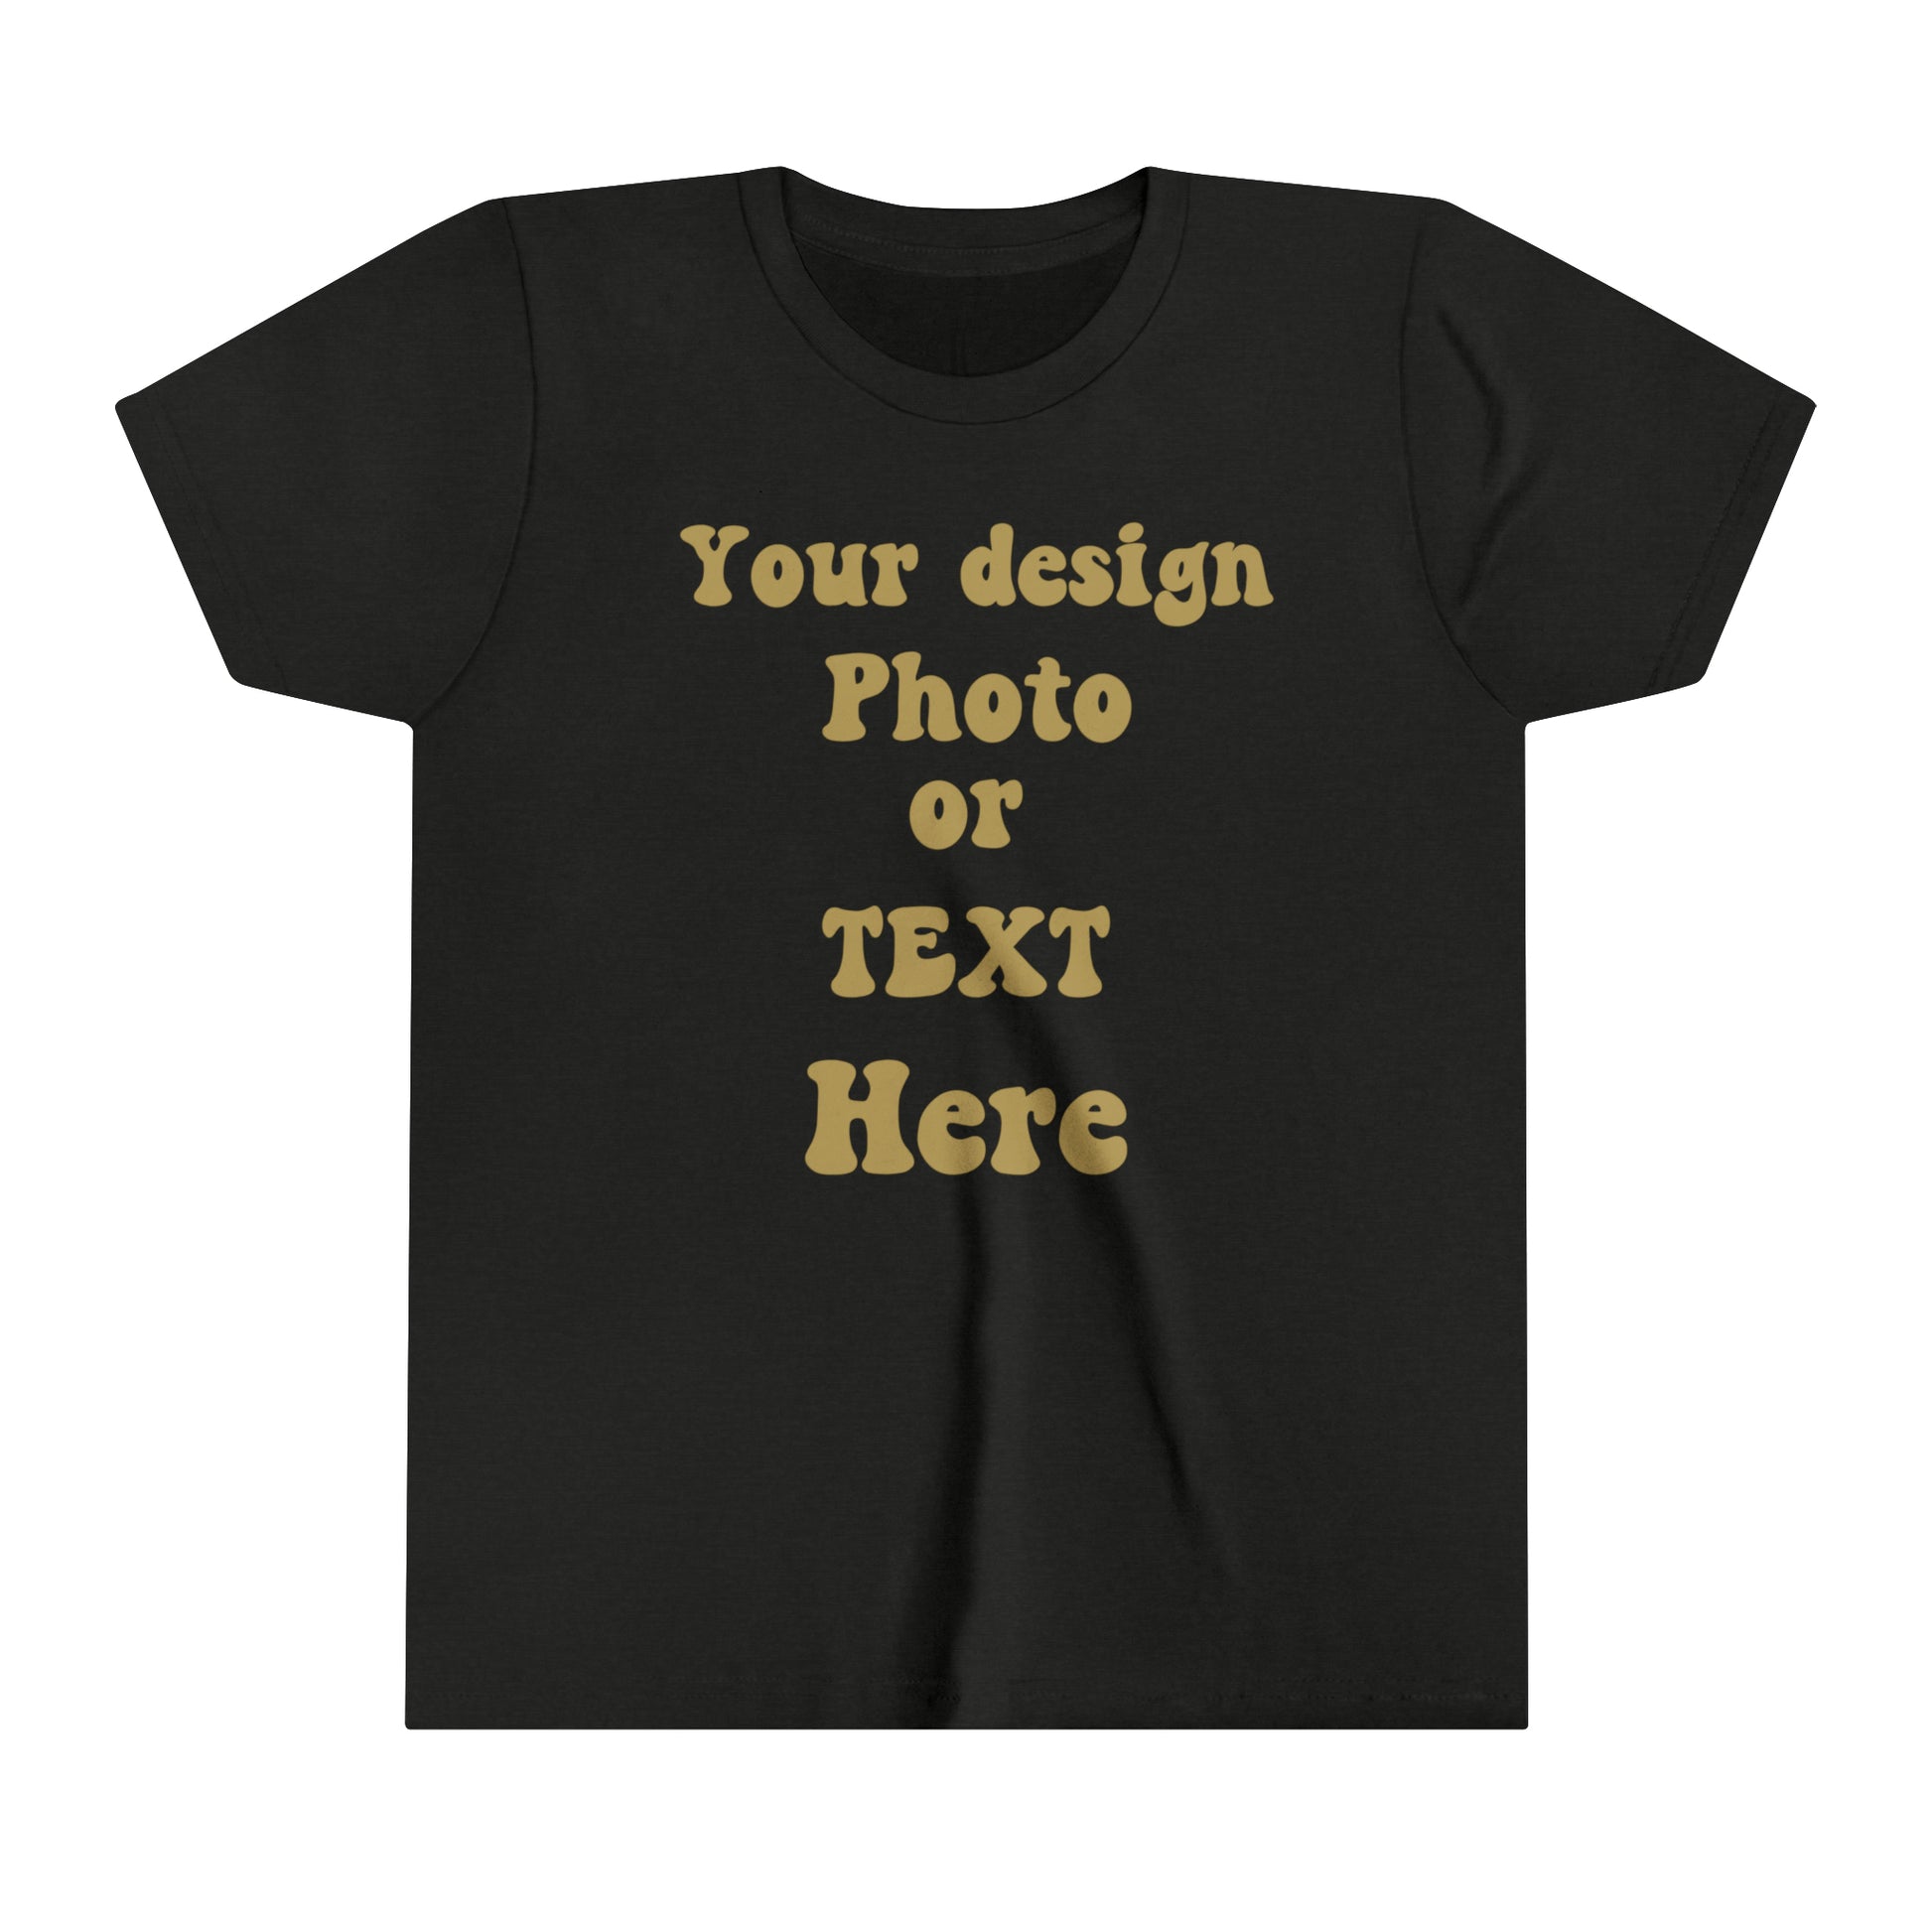 Youth Short Sleeve Tee - Personalized with Your Photo, Text, and Design Kids clothes Black Heather S 